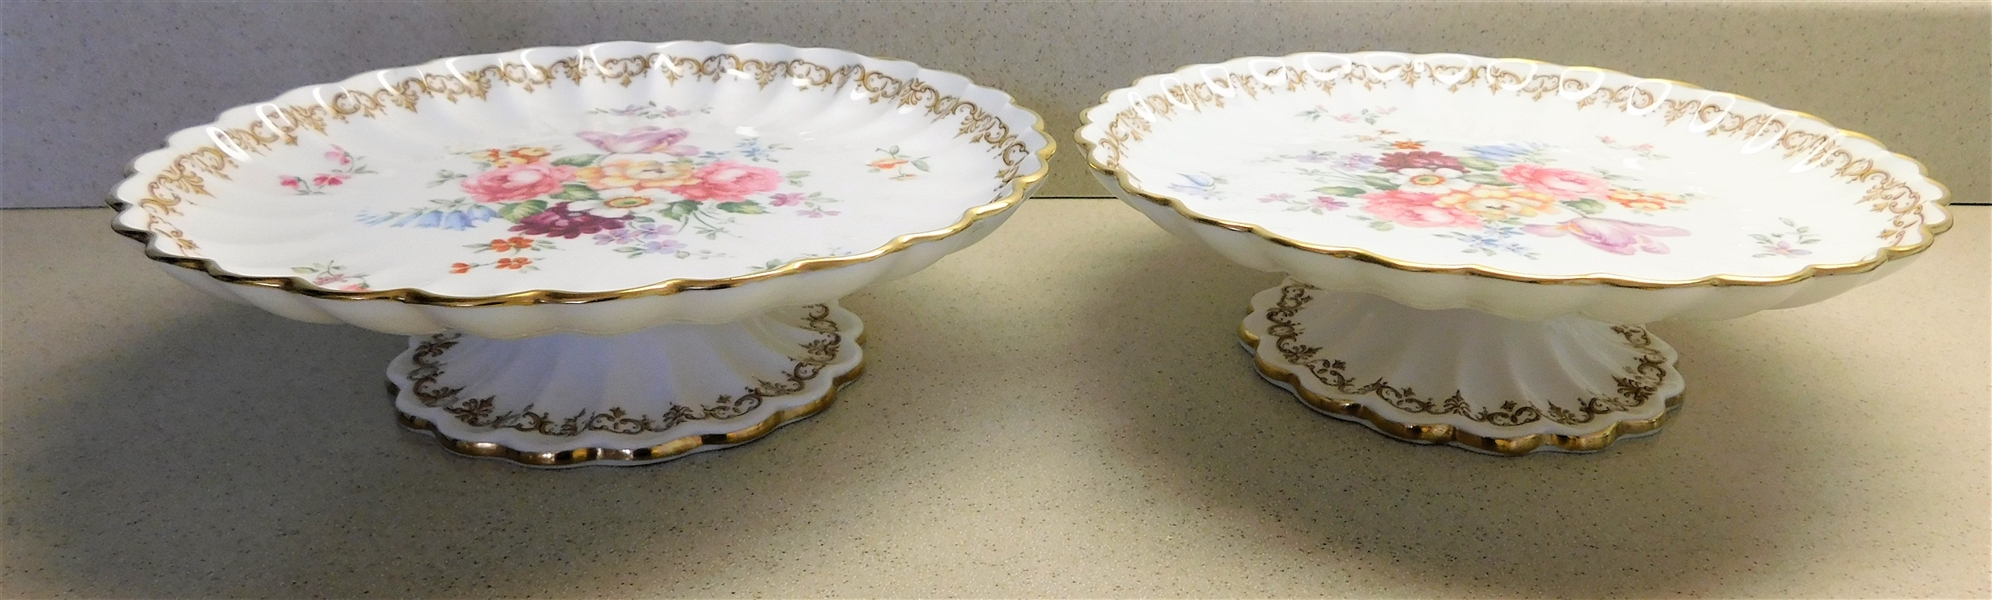 Crown Staffordshire England "England Bouquet" Footed Pastry Servers - 8 1/4" across 2 1/2" tall 